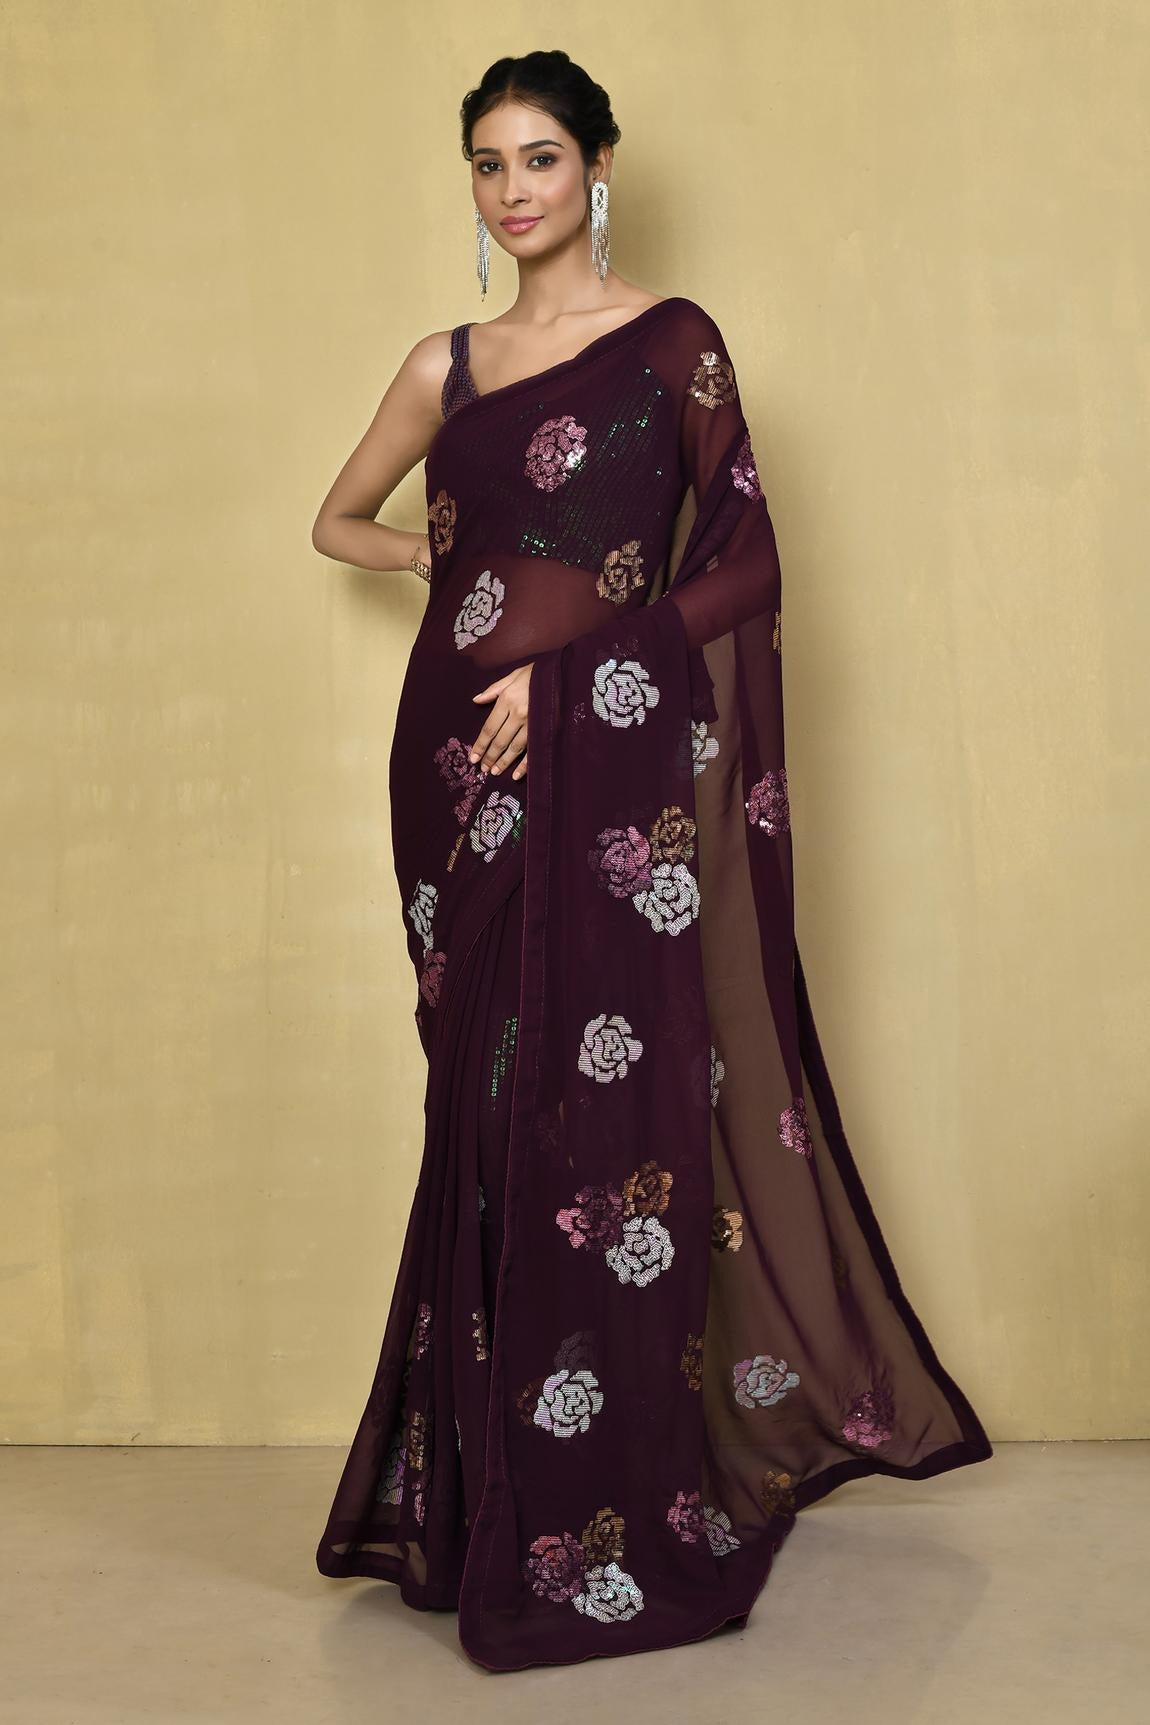 Beautiful Wine multi Color 4 type sequin flower work with back patch piping border Saree For Women